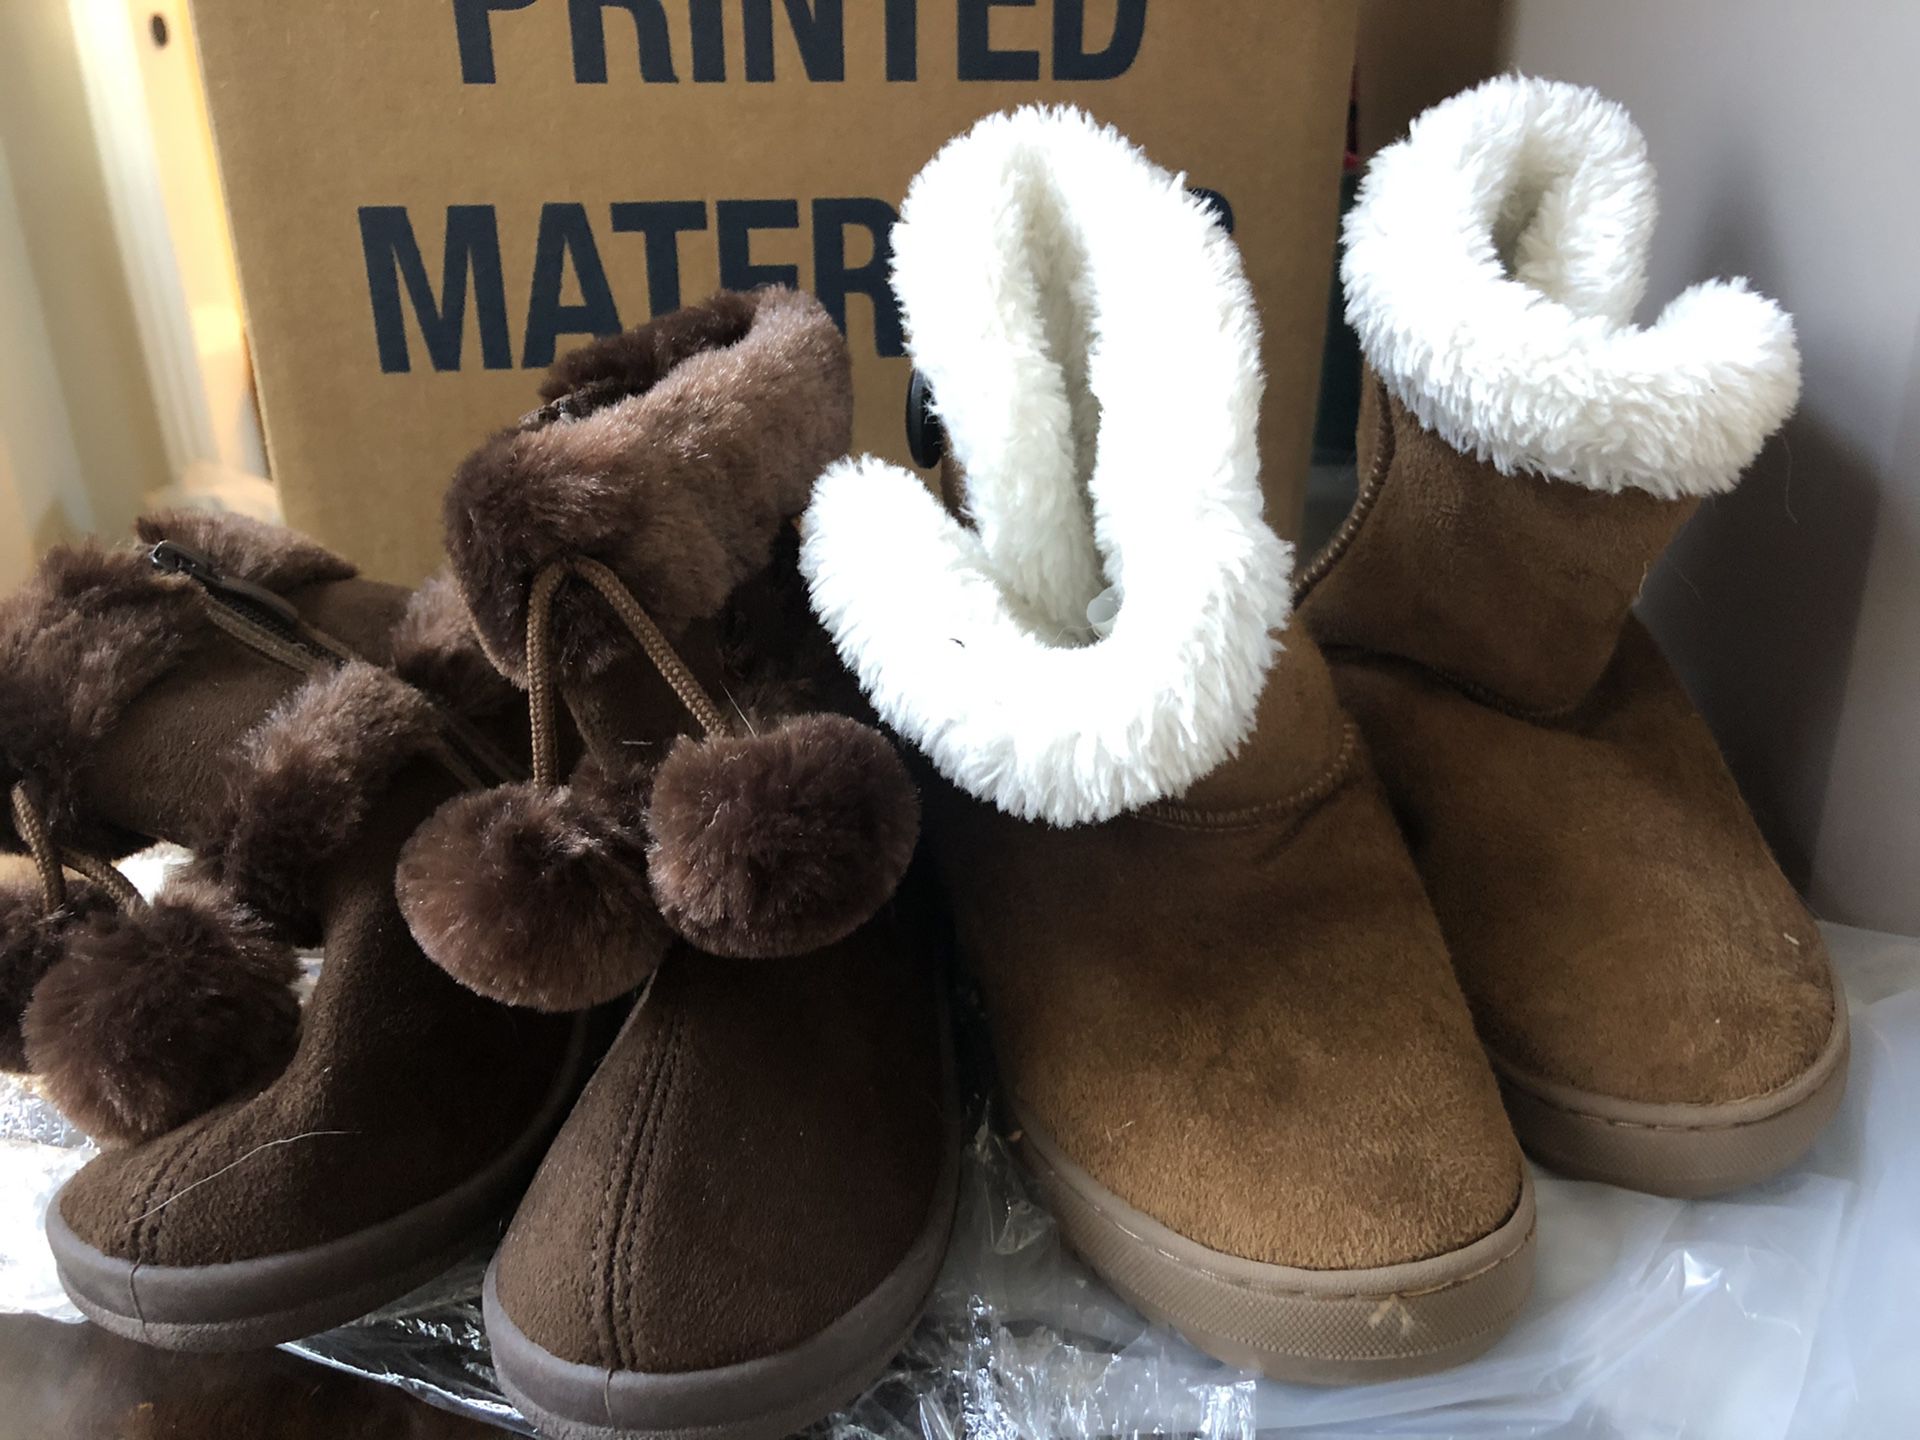 Girl toddler boots 9/10c